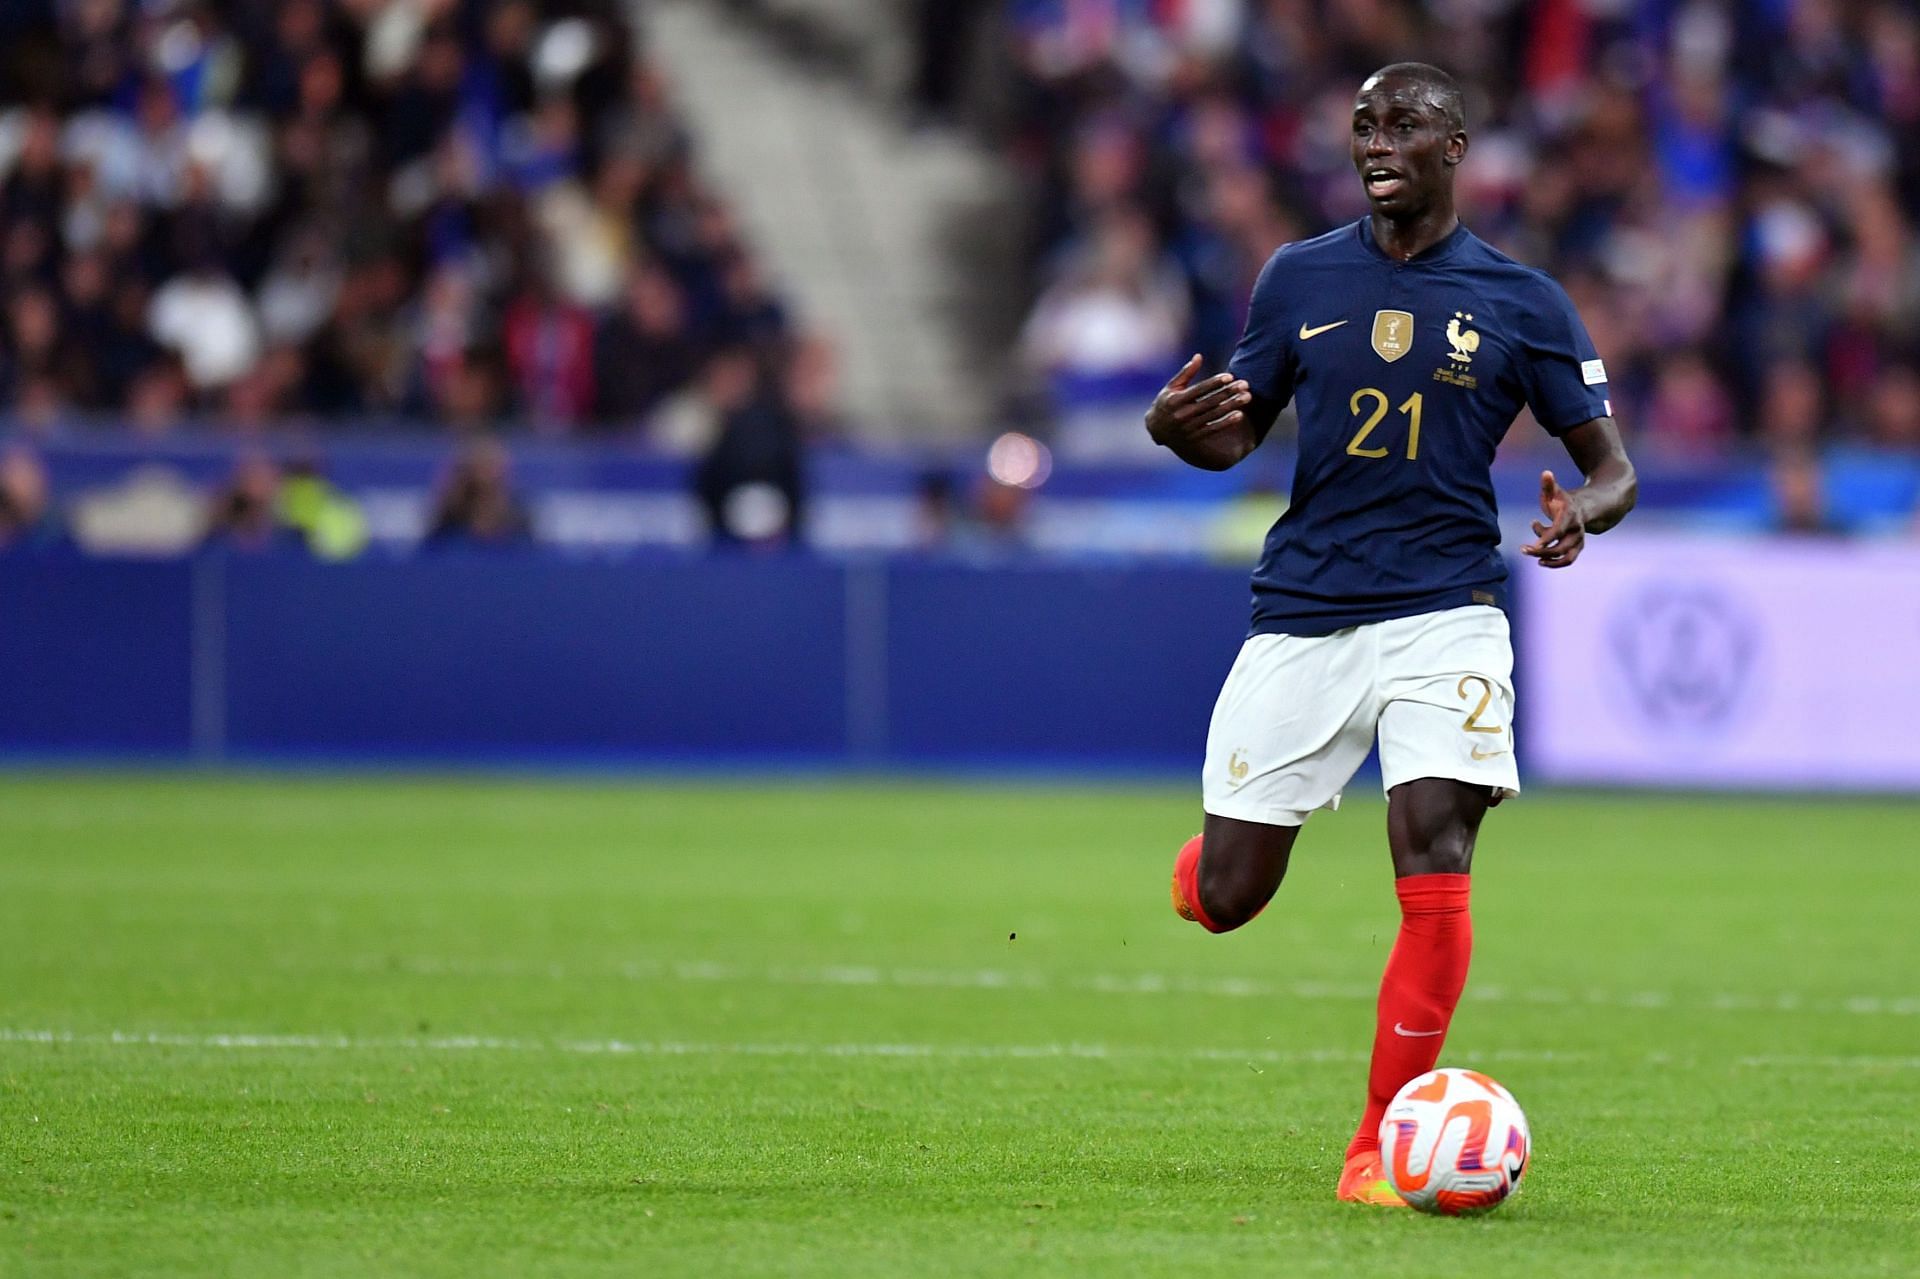 Ferland Mendy will not represent France at 2022 FIFA World Cup